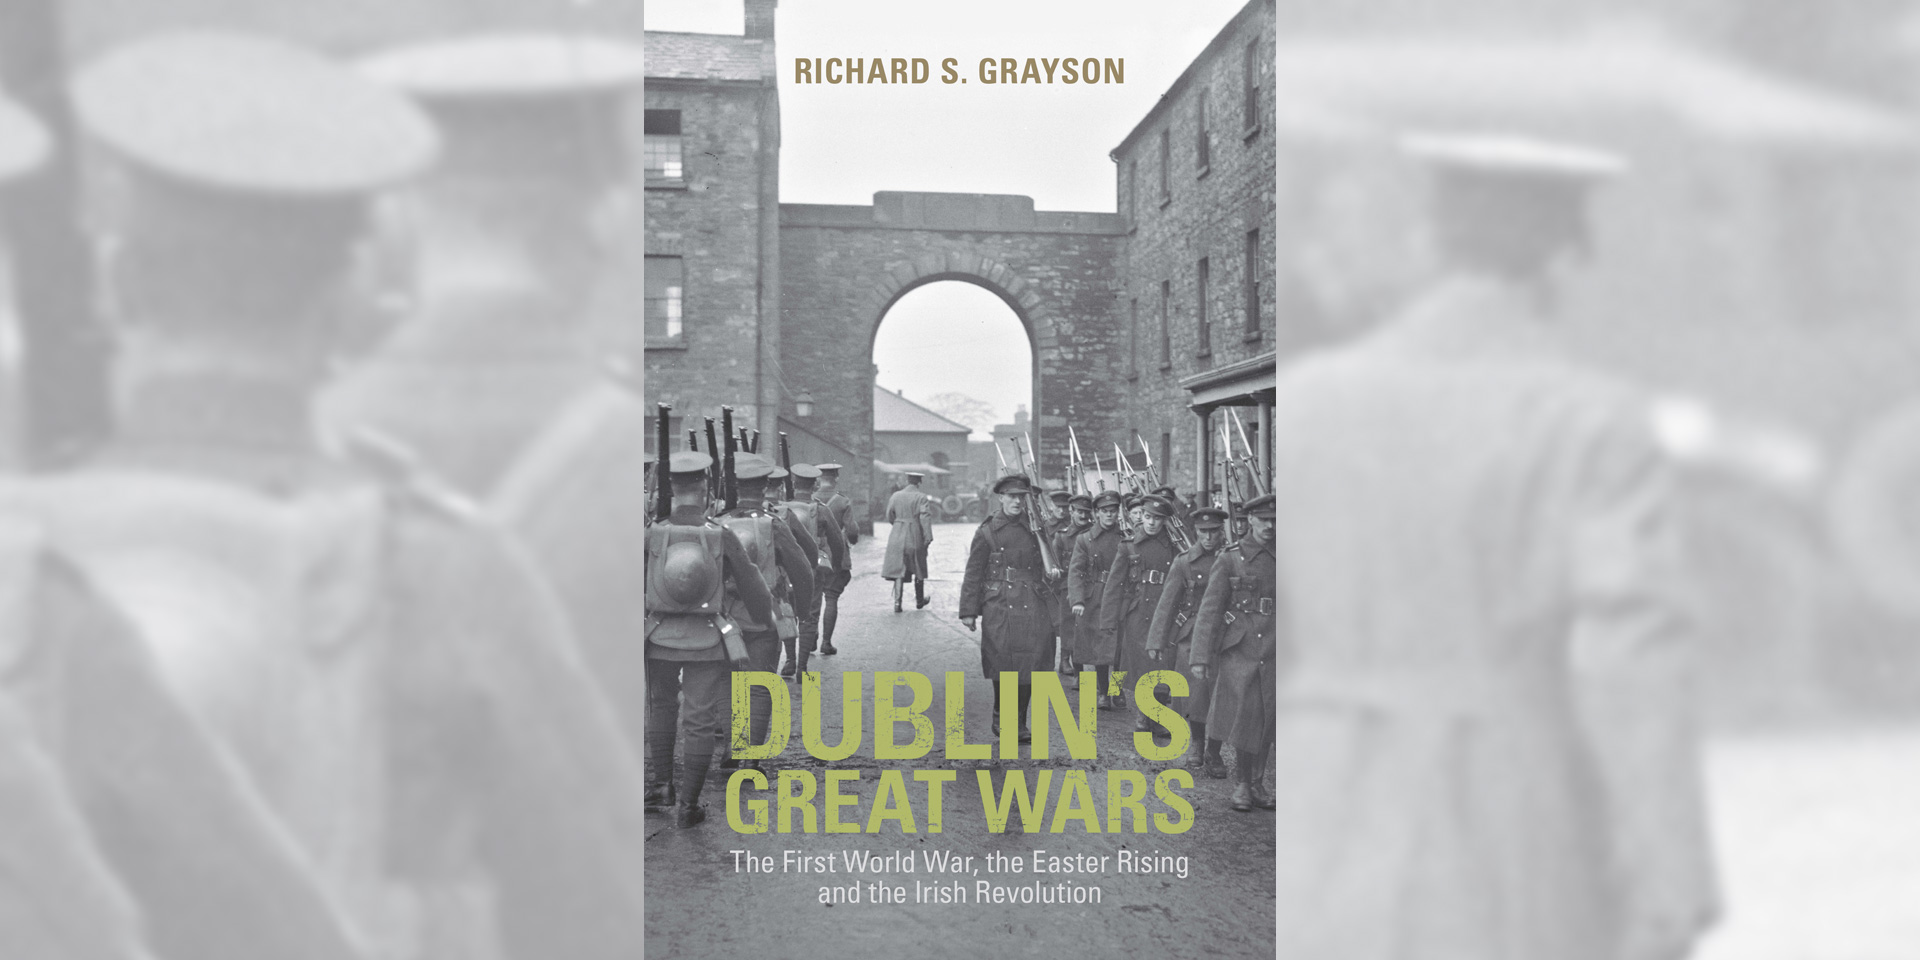 Dublin’s Great Wars: The First World War, the Easter Rising and the Irish Revolution